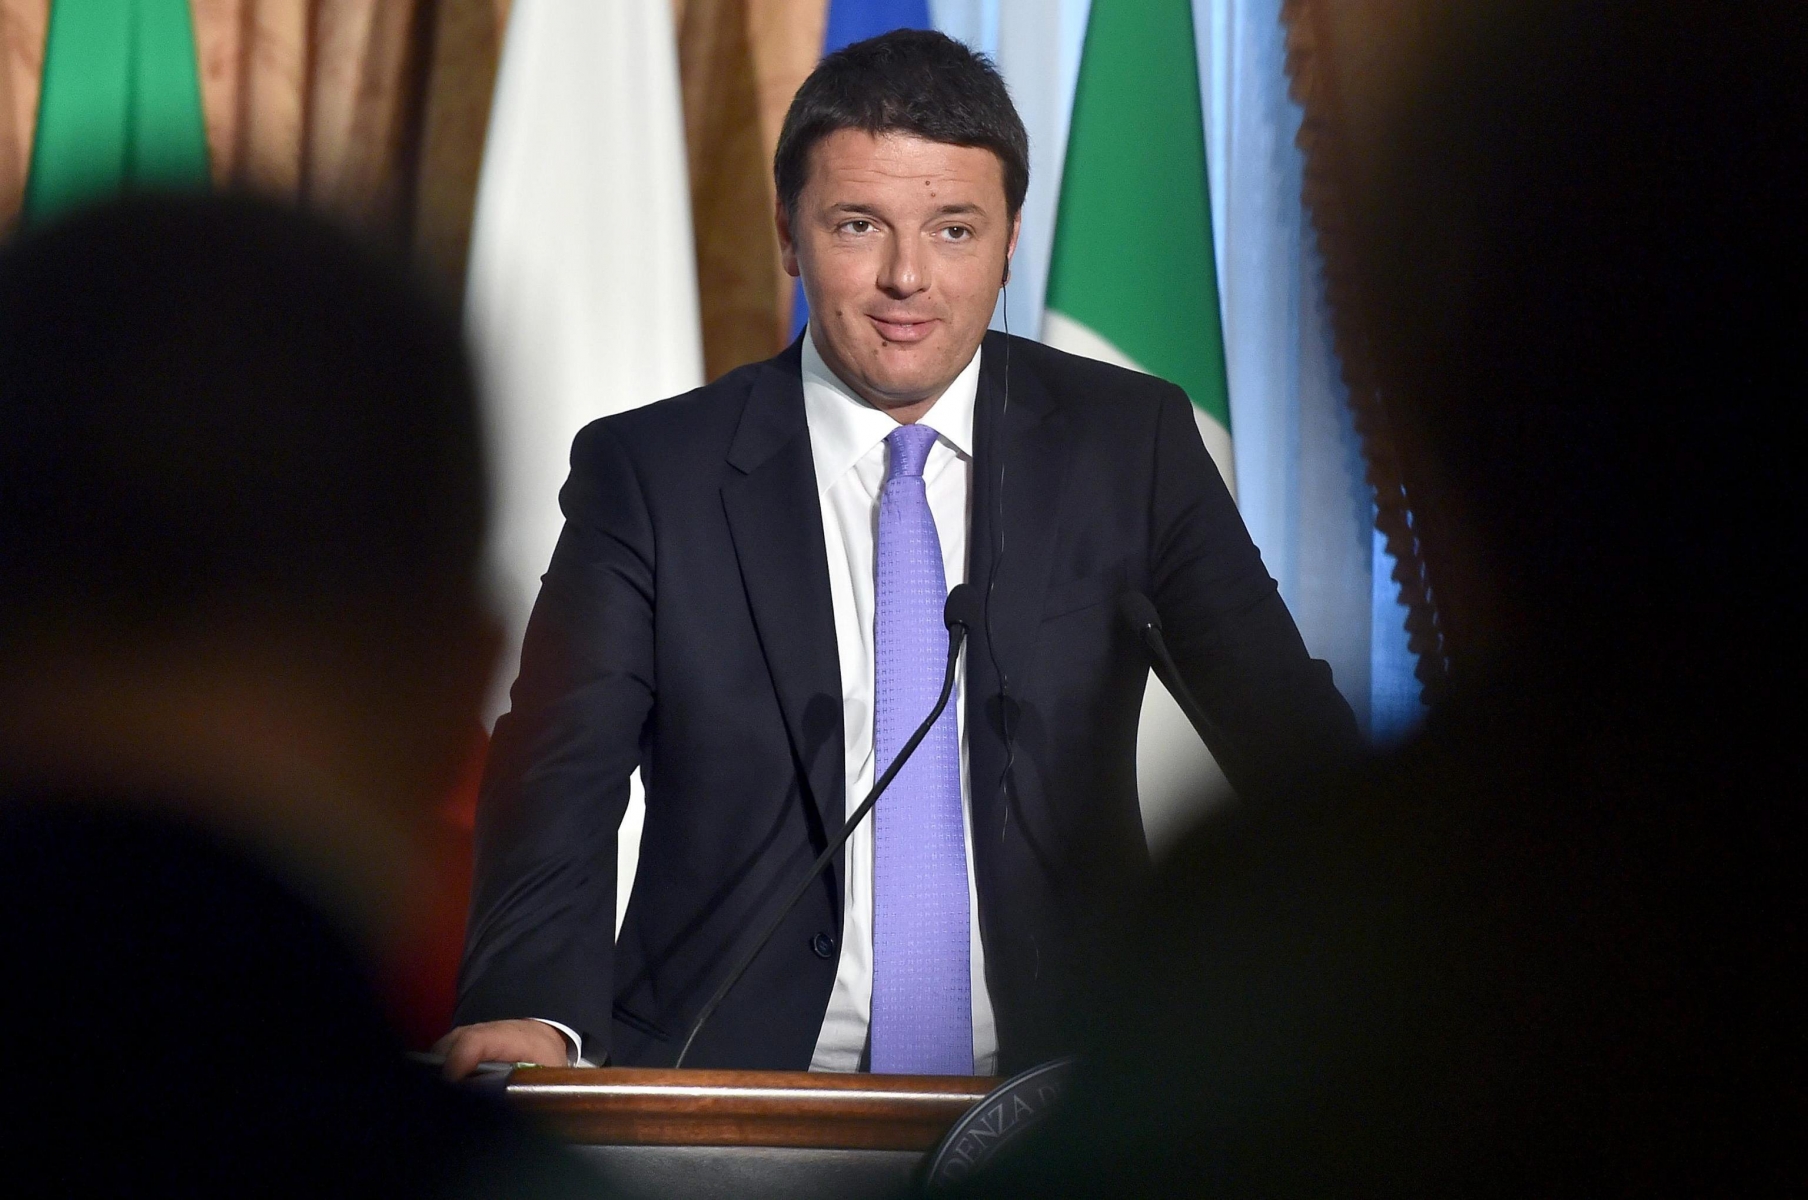 epa04214279 Italian Prime Minister Matteo Renzi reacts during a joint press conference with Polish Prime Minister Donald Tusk (not pictured) at Villa Doria Pamphilj in Rome, Italy, 19 May 2014. Premier Matteo Renzi hit back on 19 May 2014 after Beppe Grillo, the leader of the anti-establishment 5-Star Movement (M5S), used a Mafia jibe to suggest his political career was close to ending as the campaign for Sunday's European elections grew increasingly venomous.  EPA/ETTORE FERRARI ITALY RENZI GRILLO